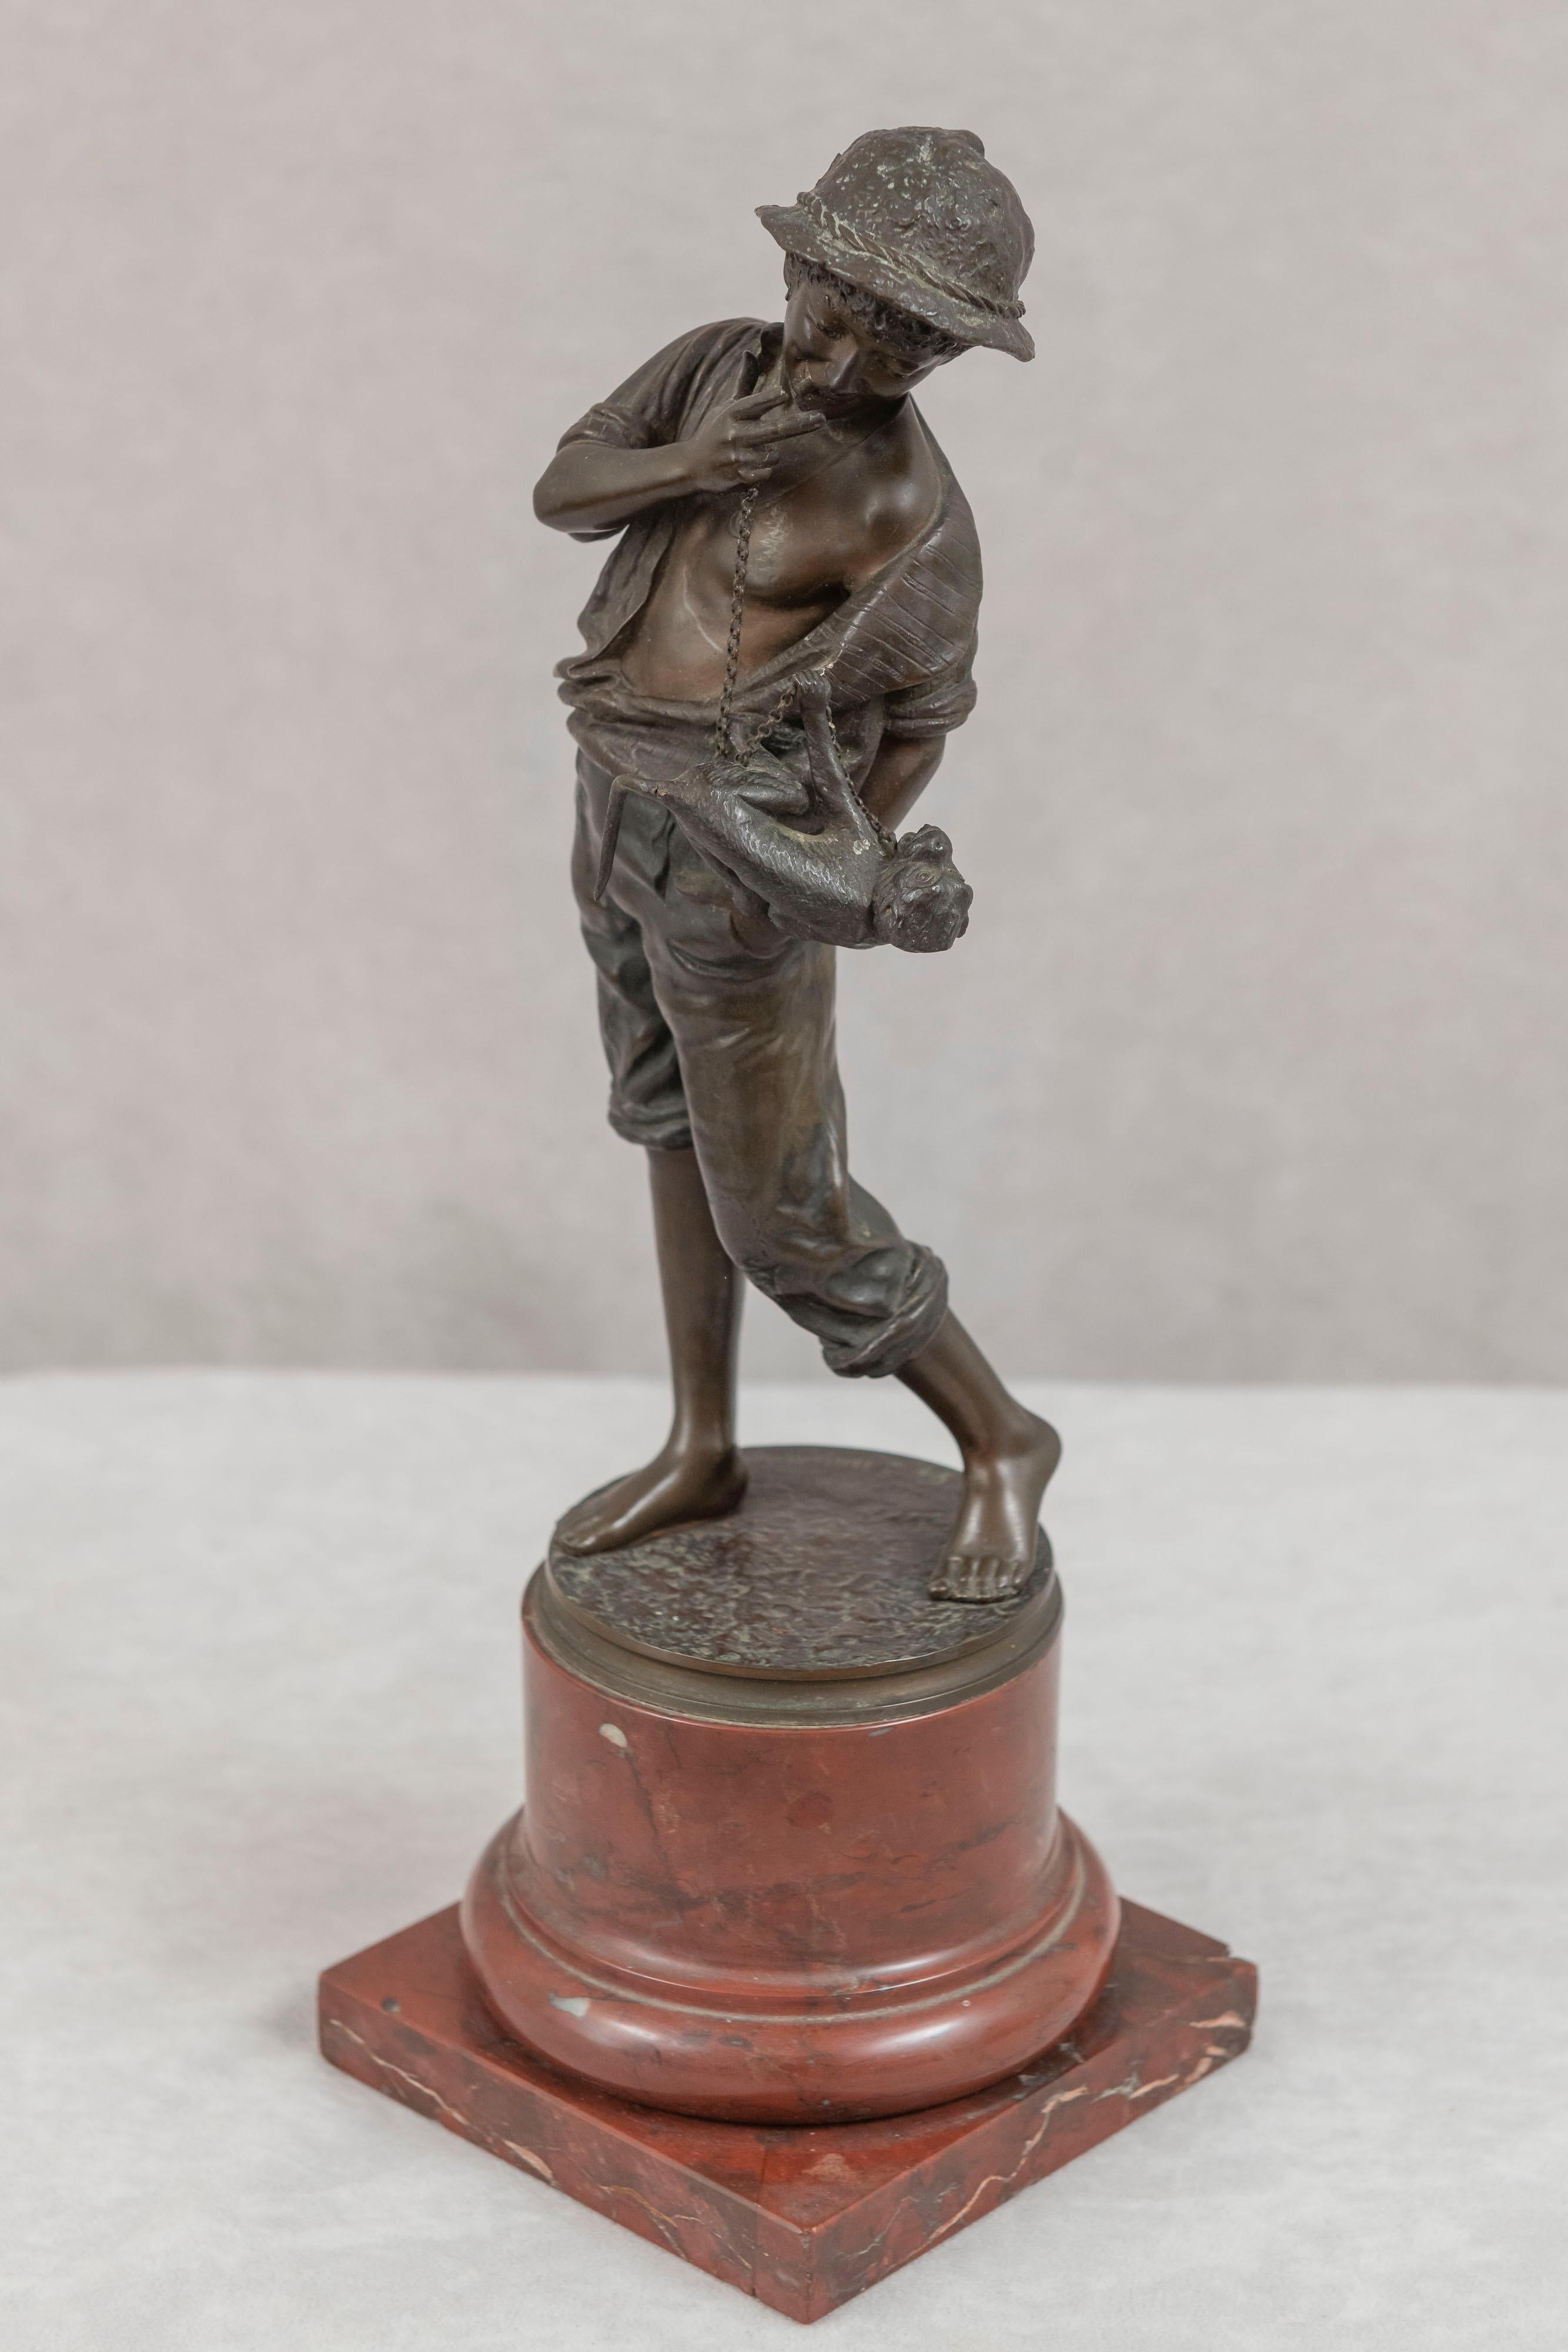 This very whimsical bronze features a young street kid, cigar in hand, and monkey on a chain in the other hand. A scene that should inspire a smile. Sculpted by the Danish artist Carl Theodore Wegener (1865-1935), and cast by the noted German